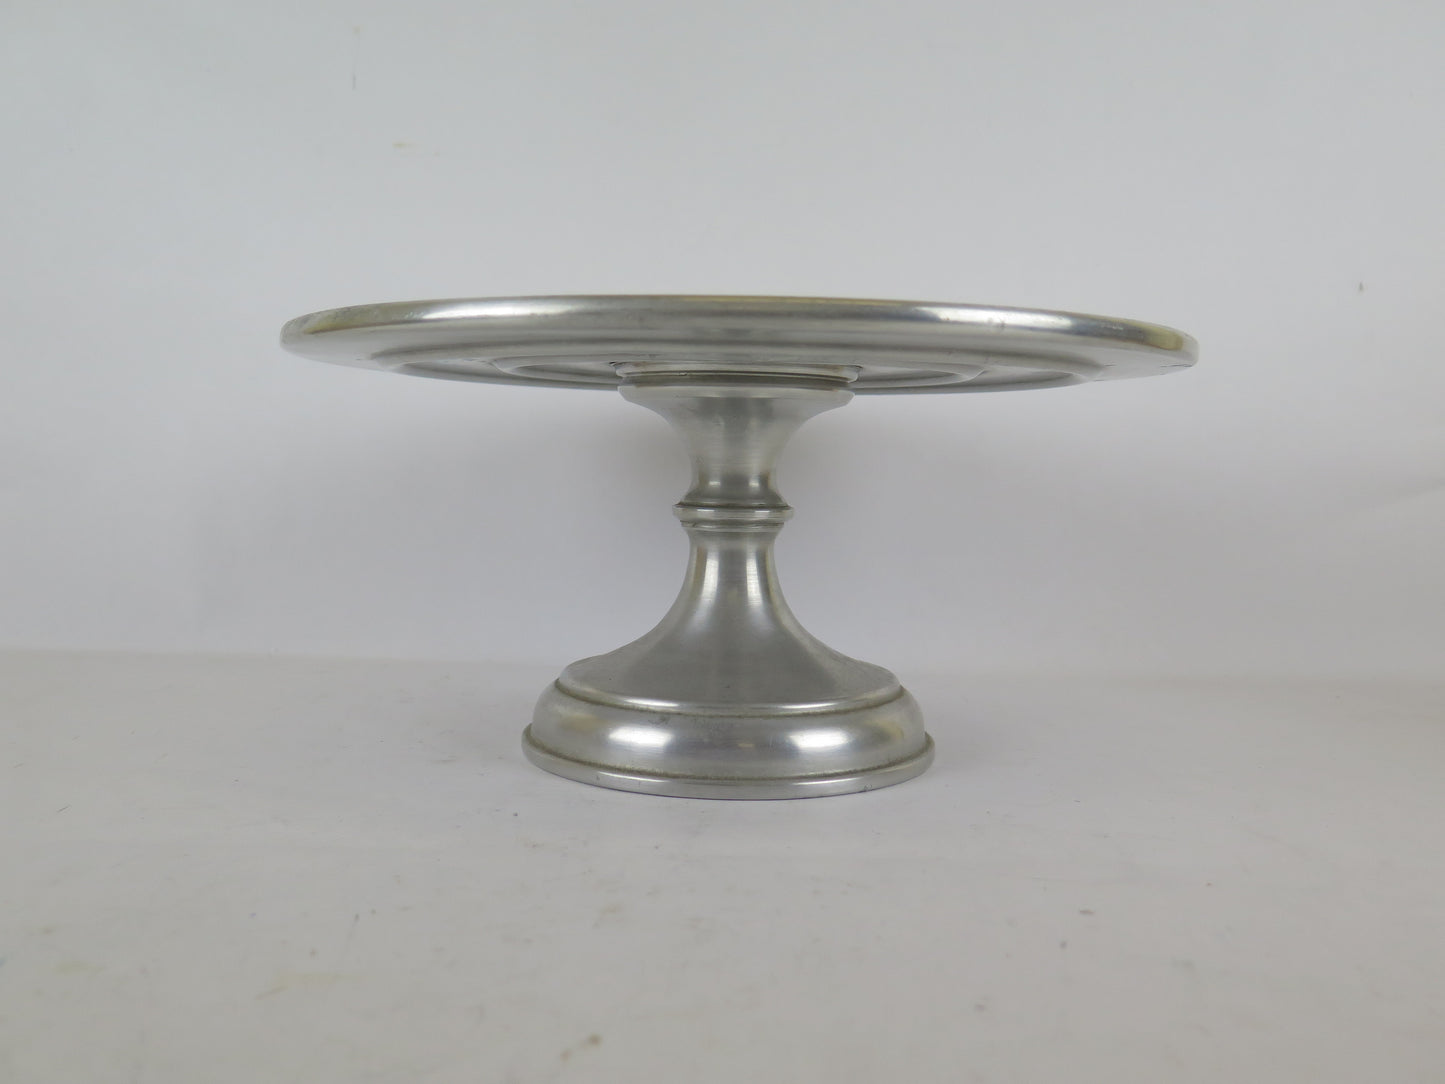 ANTIQUE CAKE STAND ART NOUVEAU LIBERTY STYLE CAKE STAND R146